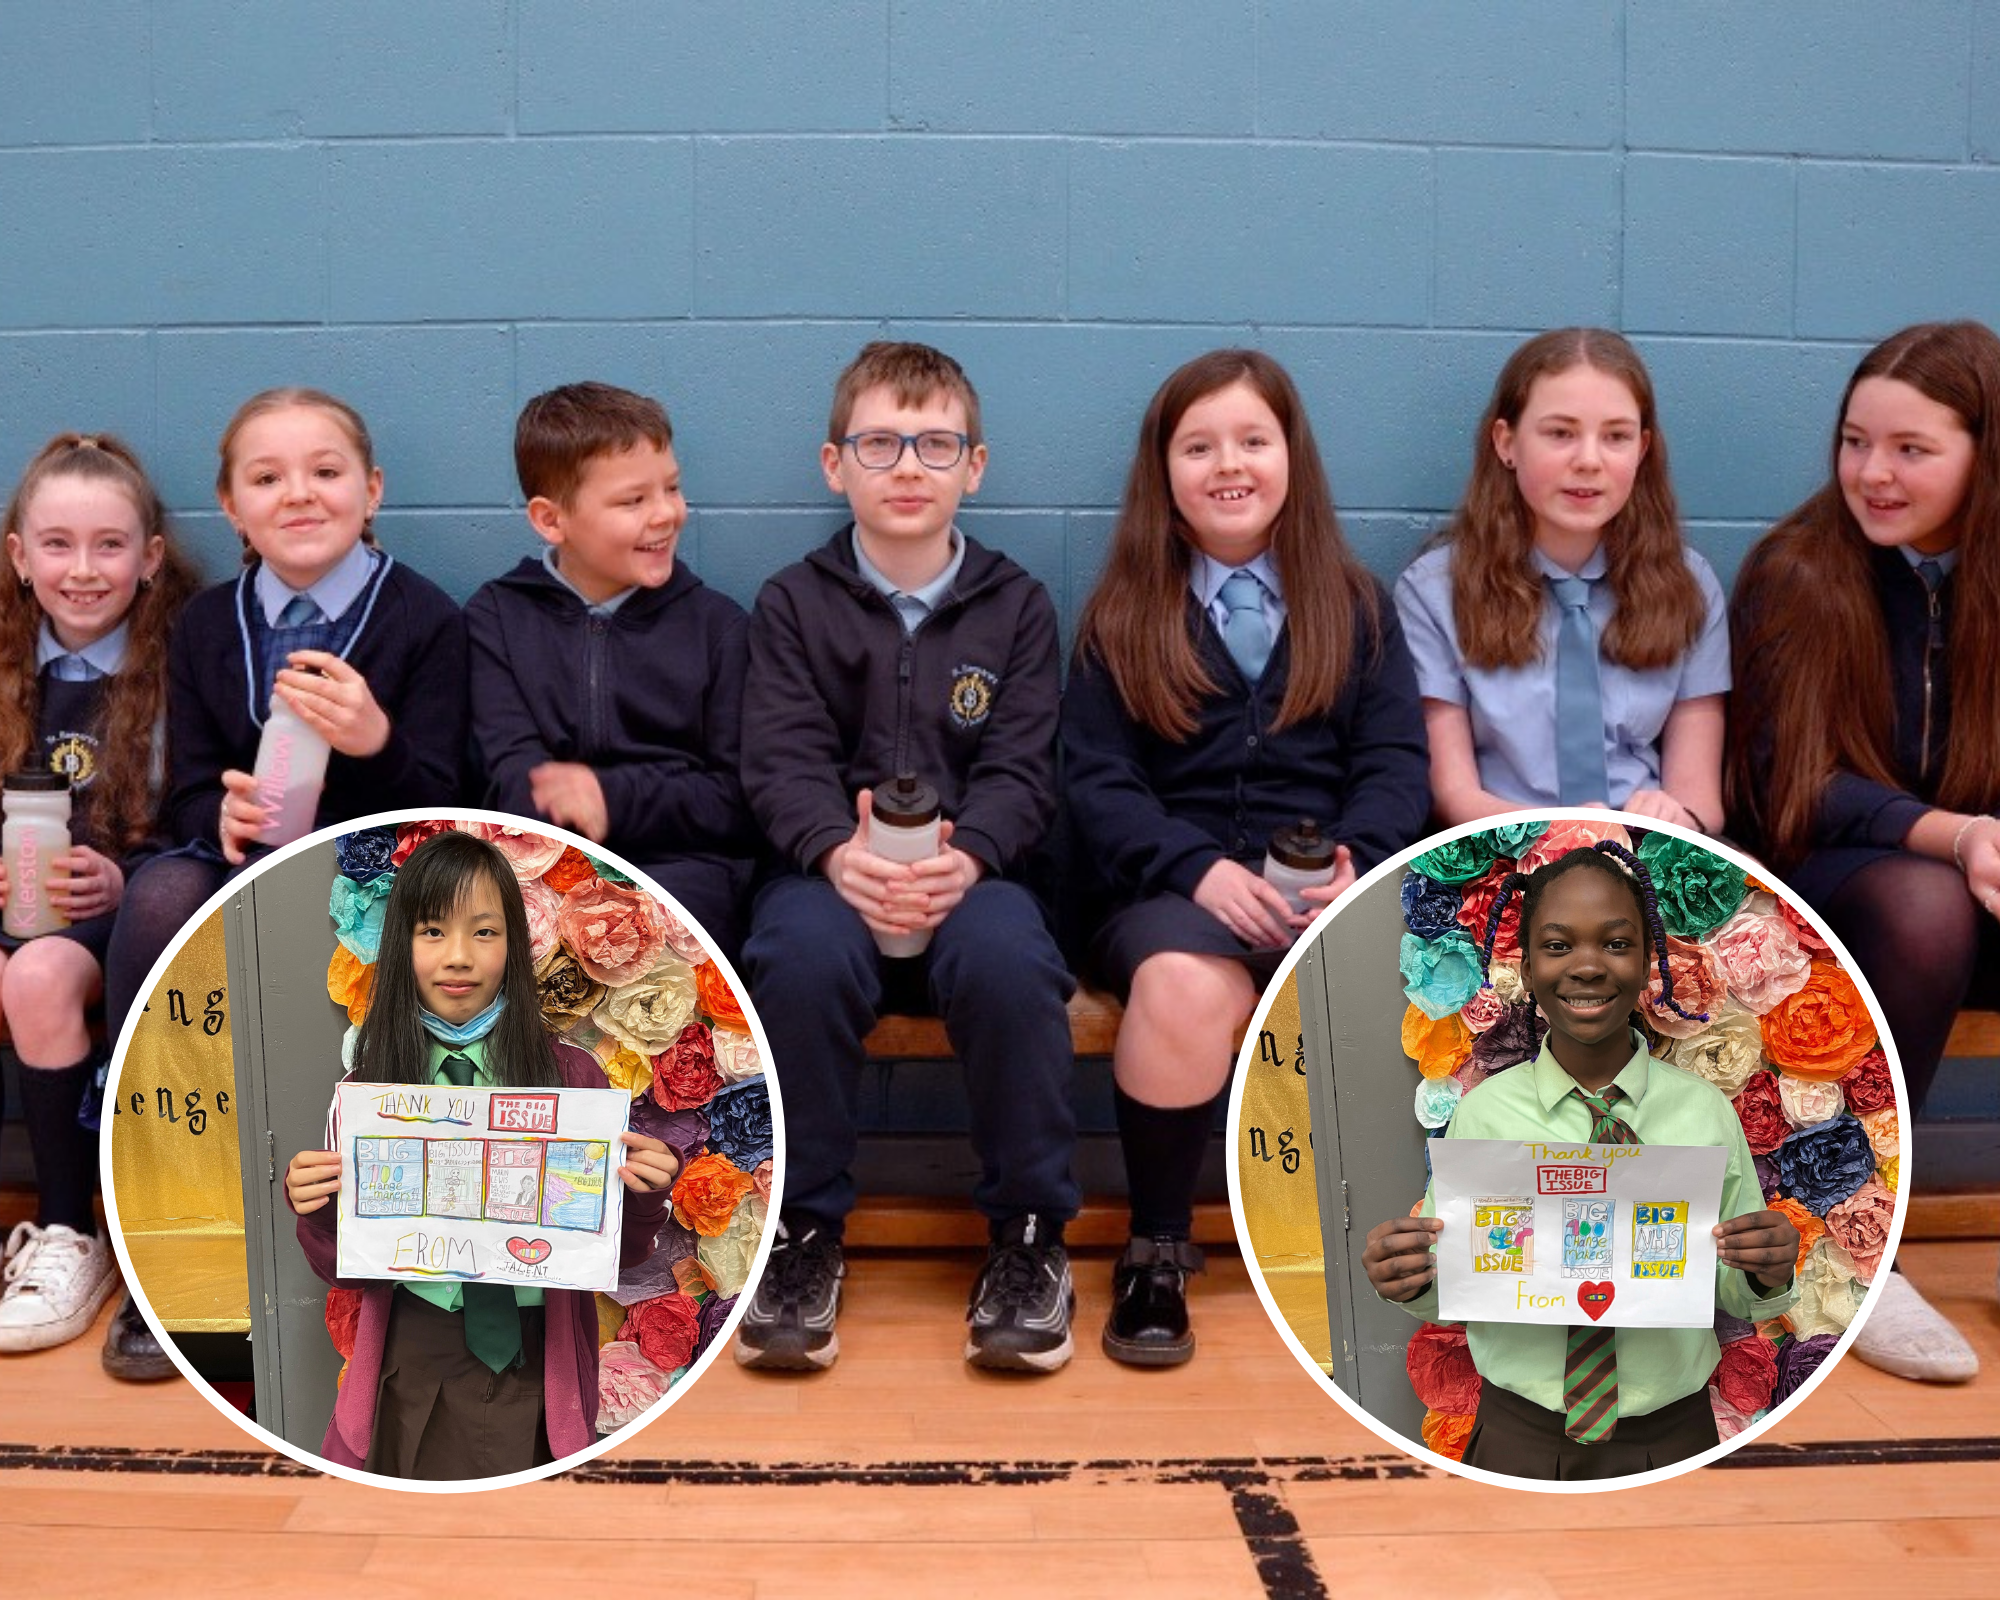 Glasgow schools launch their own businesses as part of Big Issue project